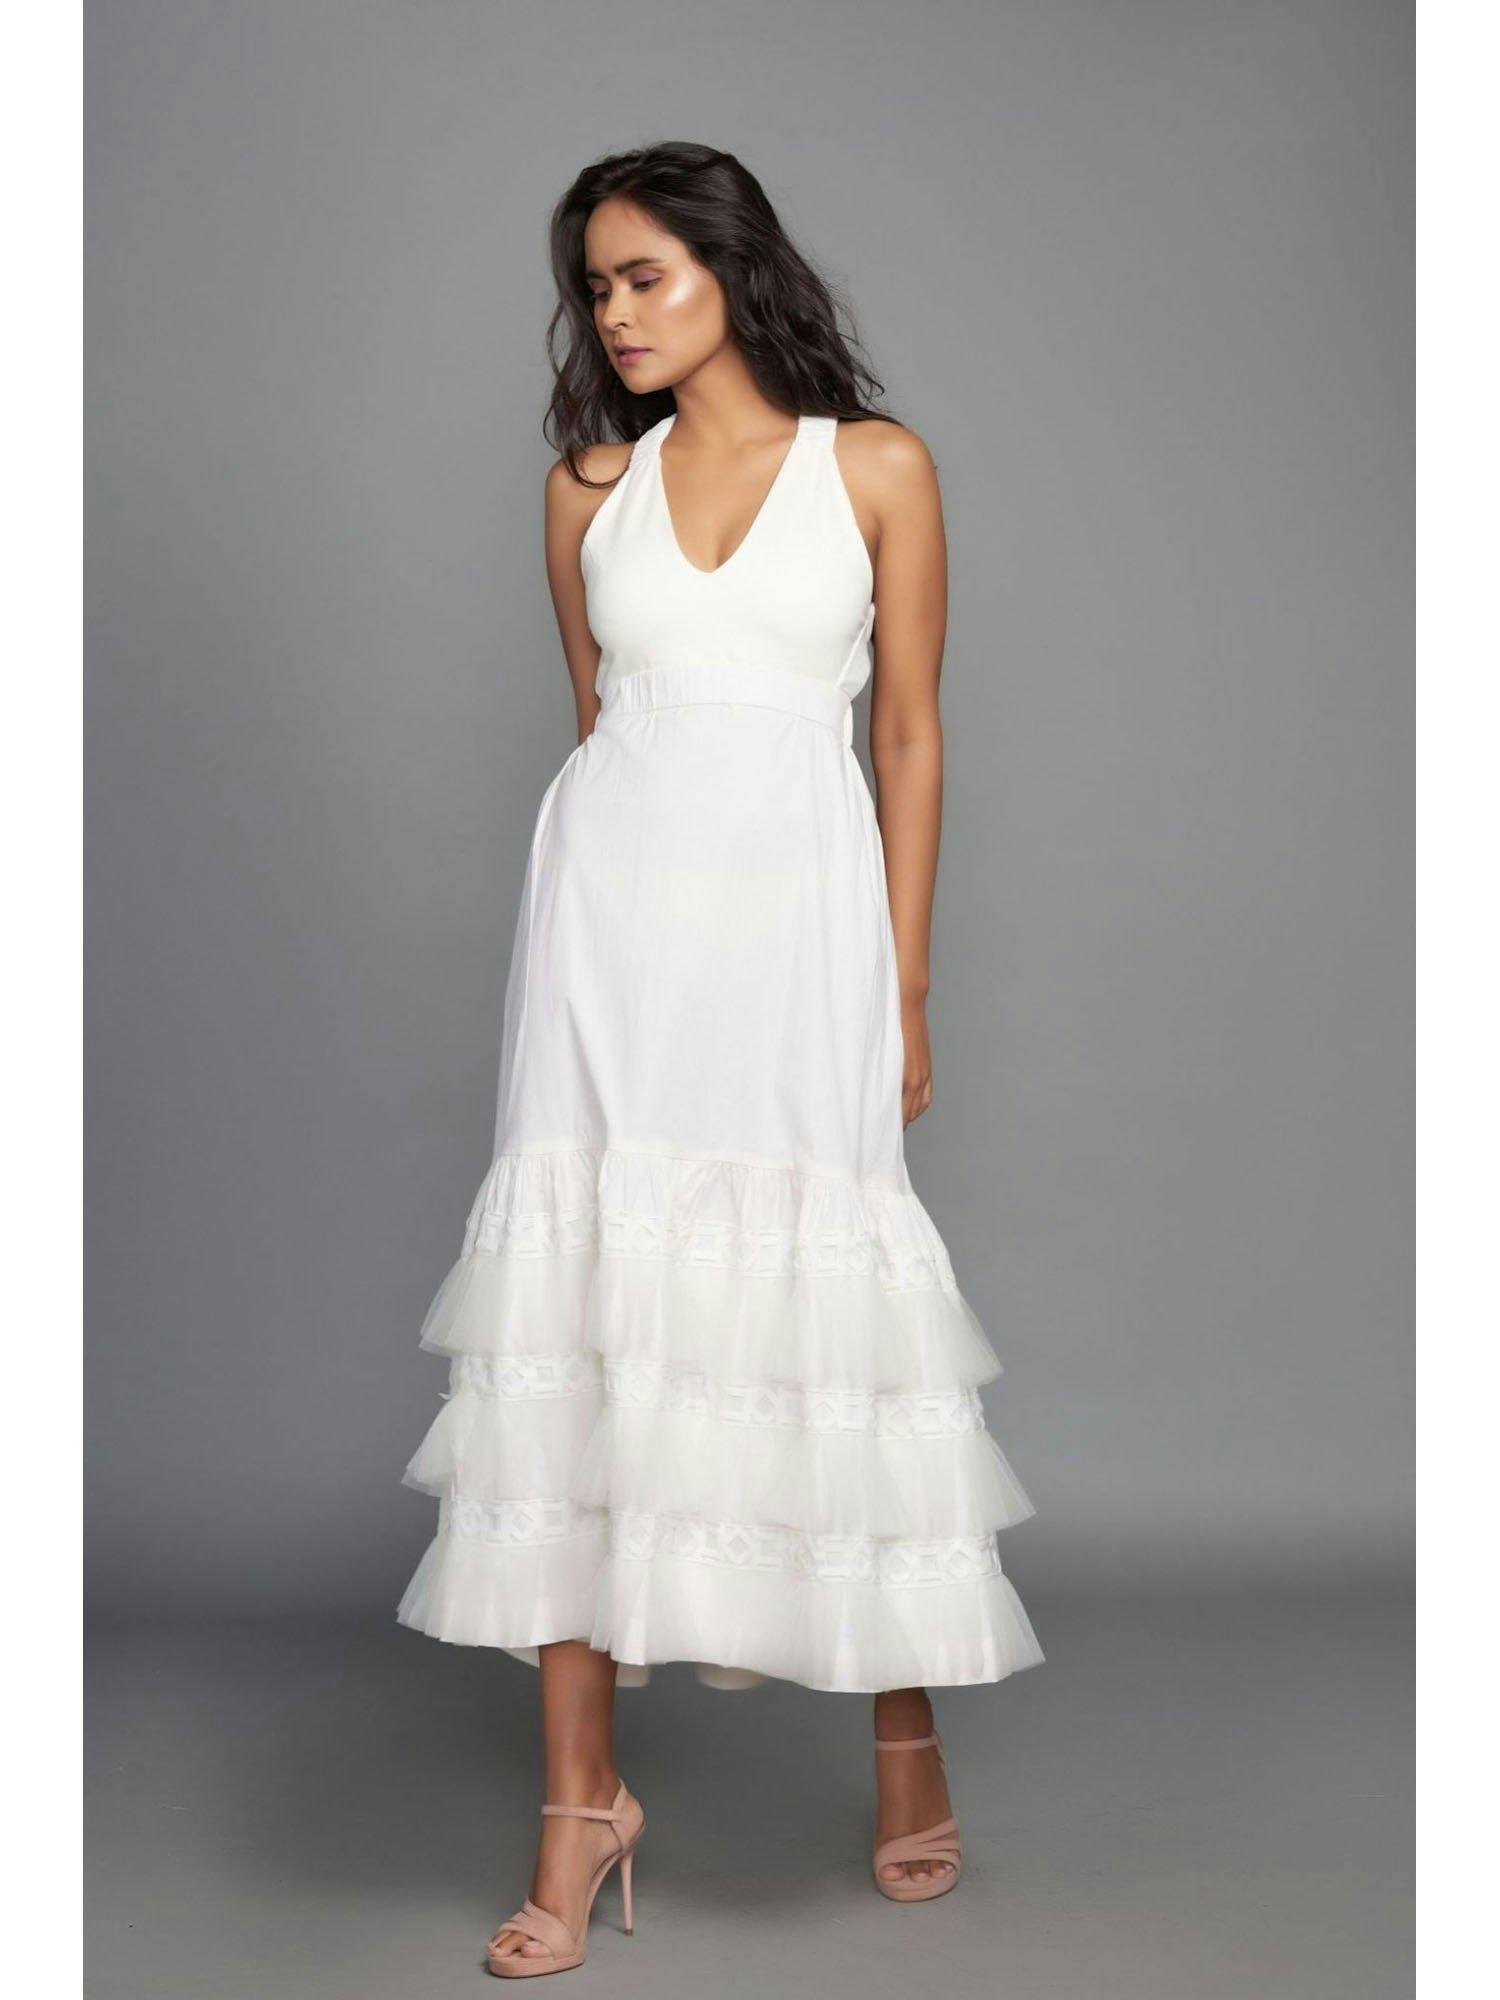 white dress with cross back and pleated net and cutwork details on the bottom, a product by Deepika Arora